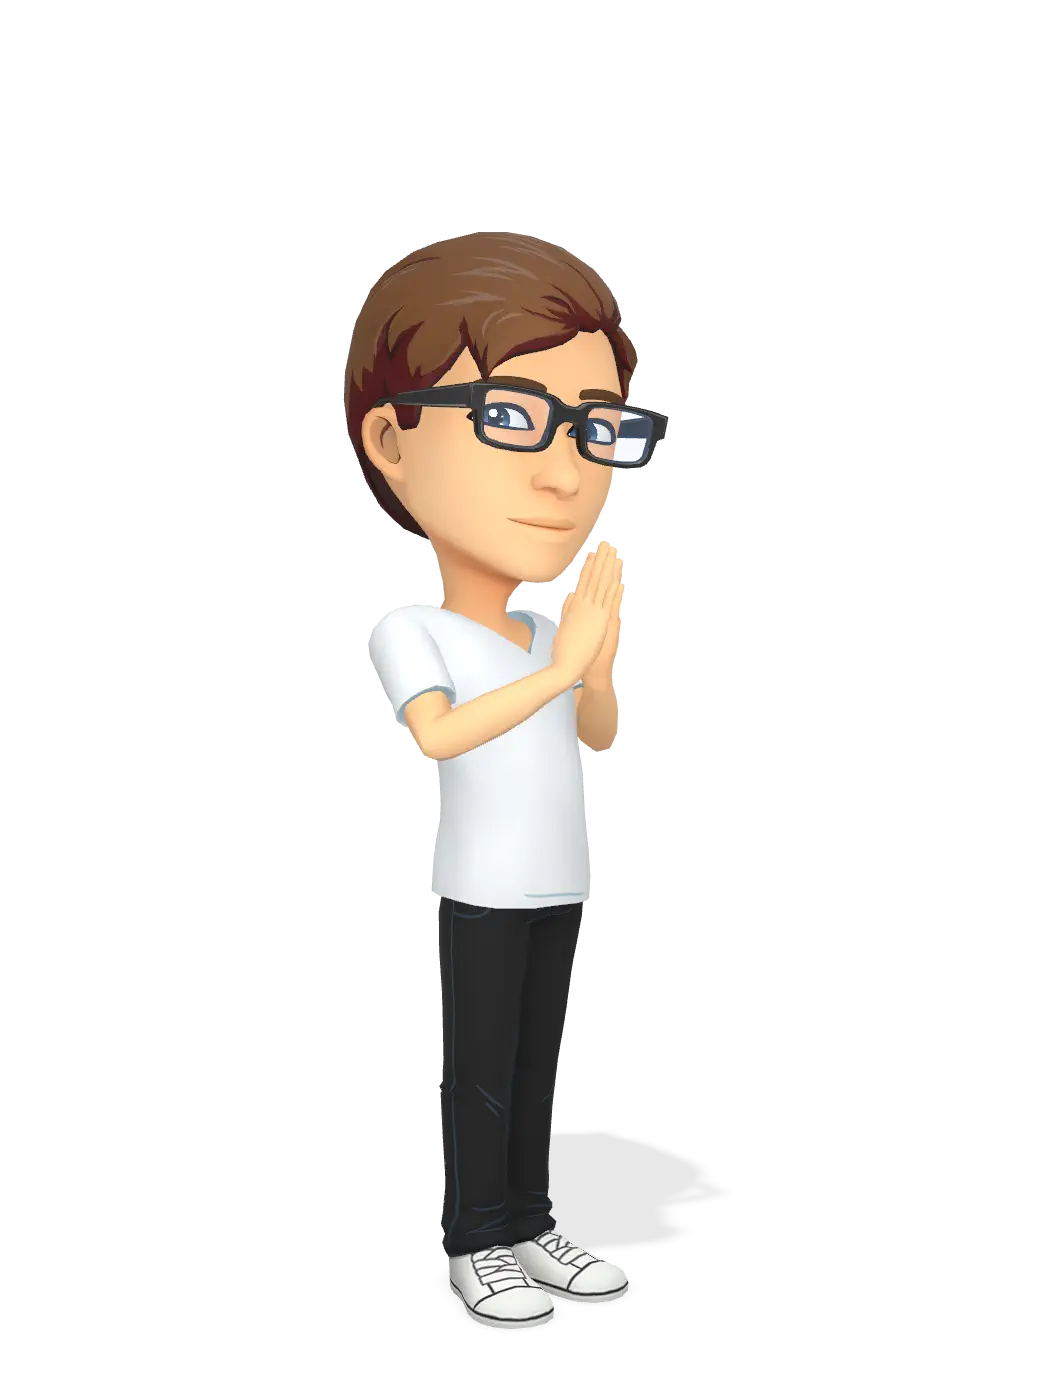 3D Bitmoji for wolfeisout